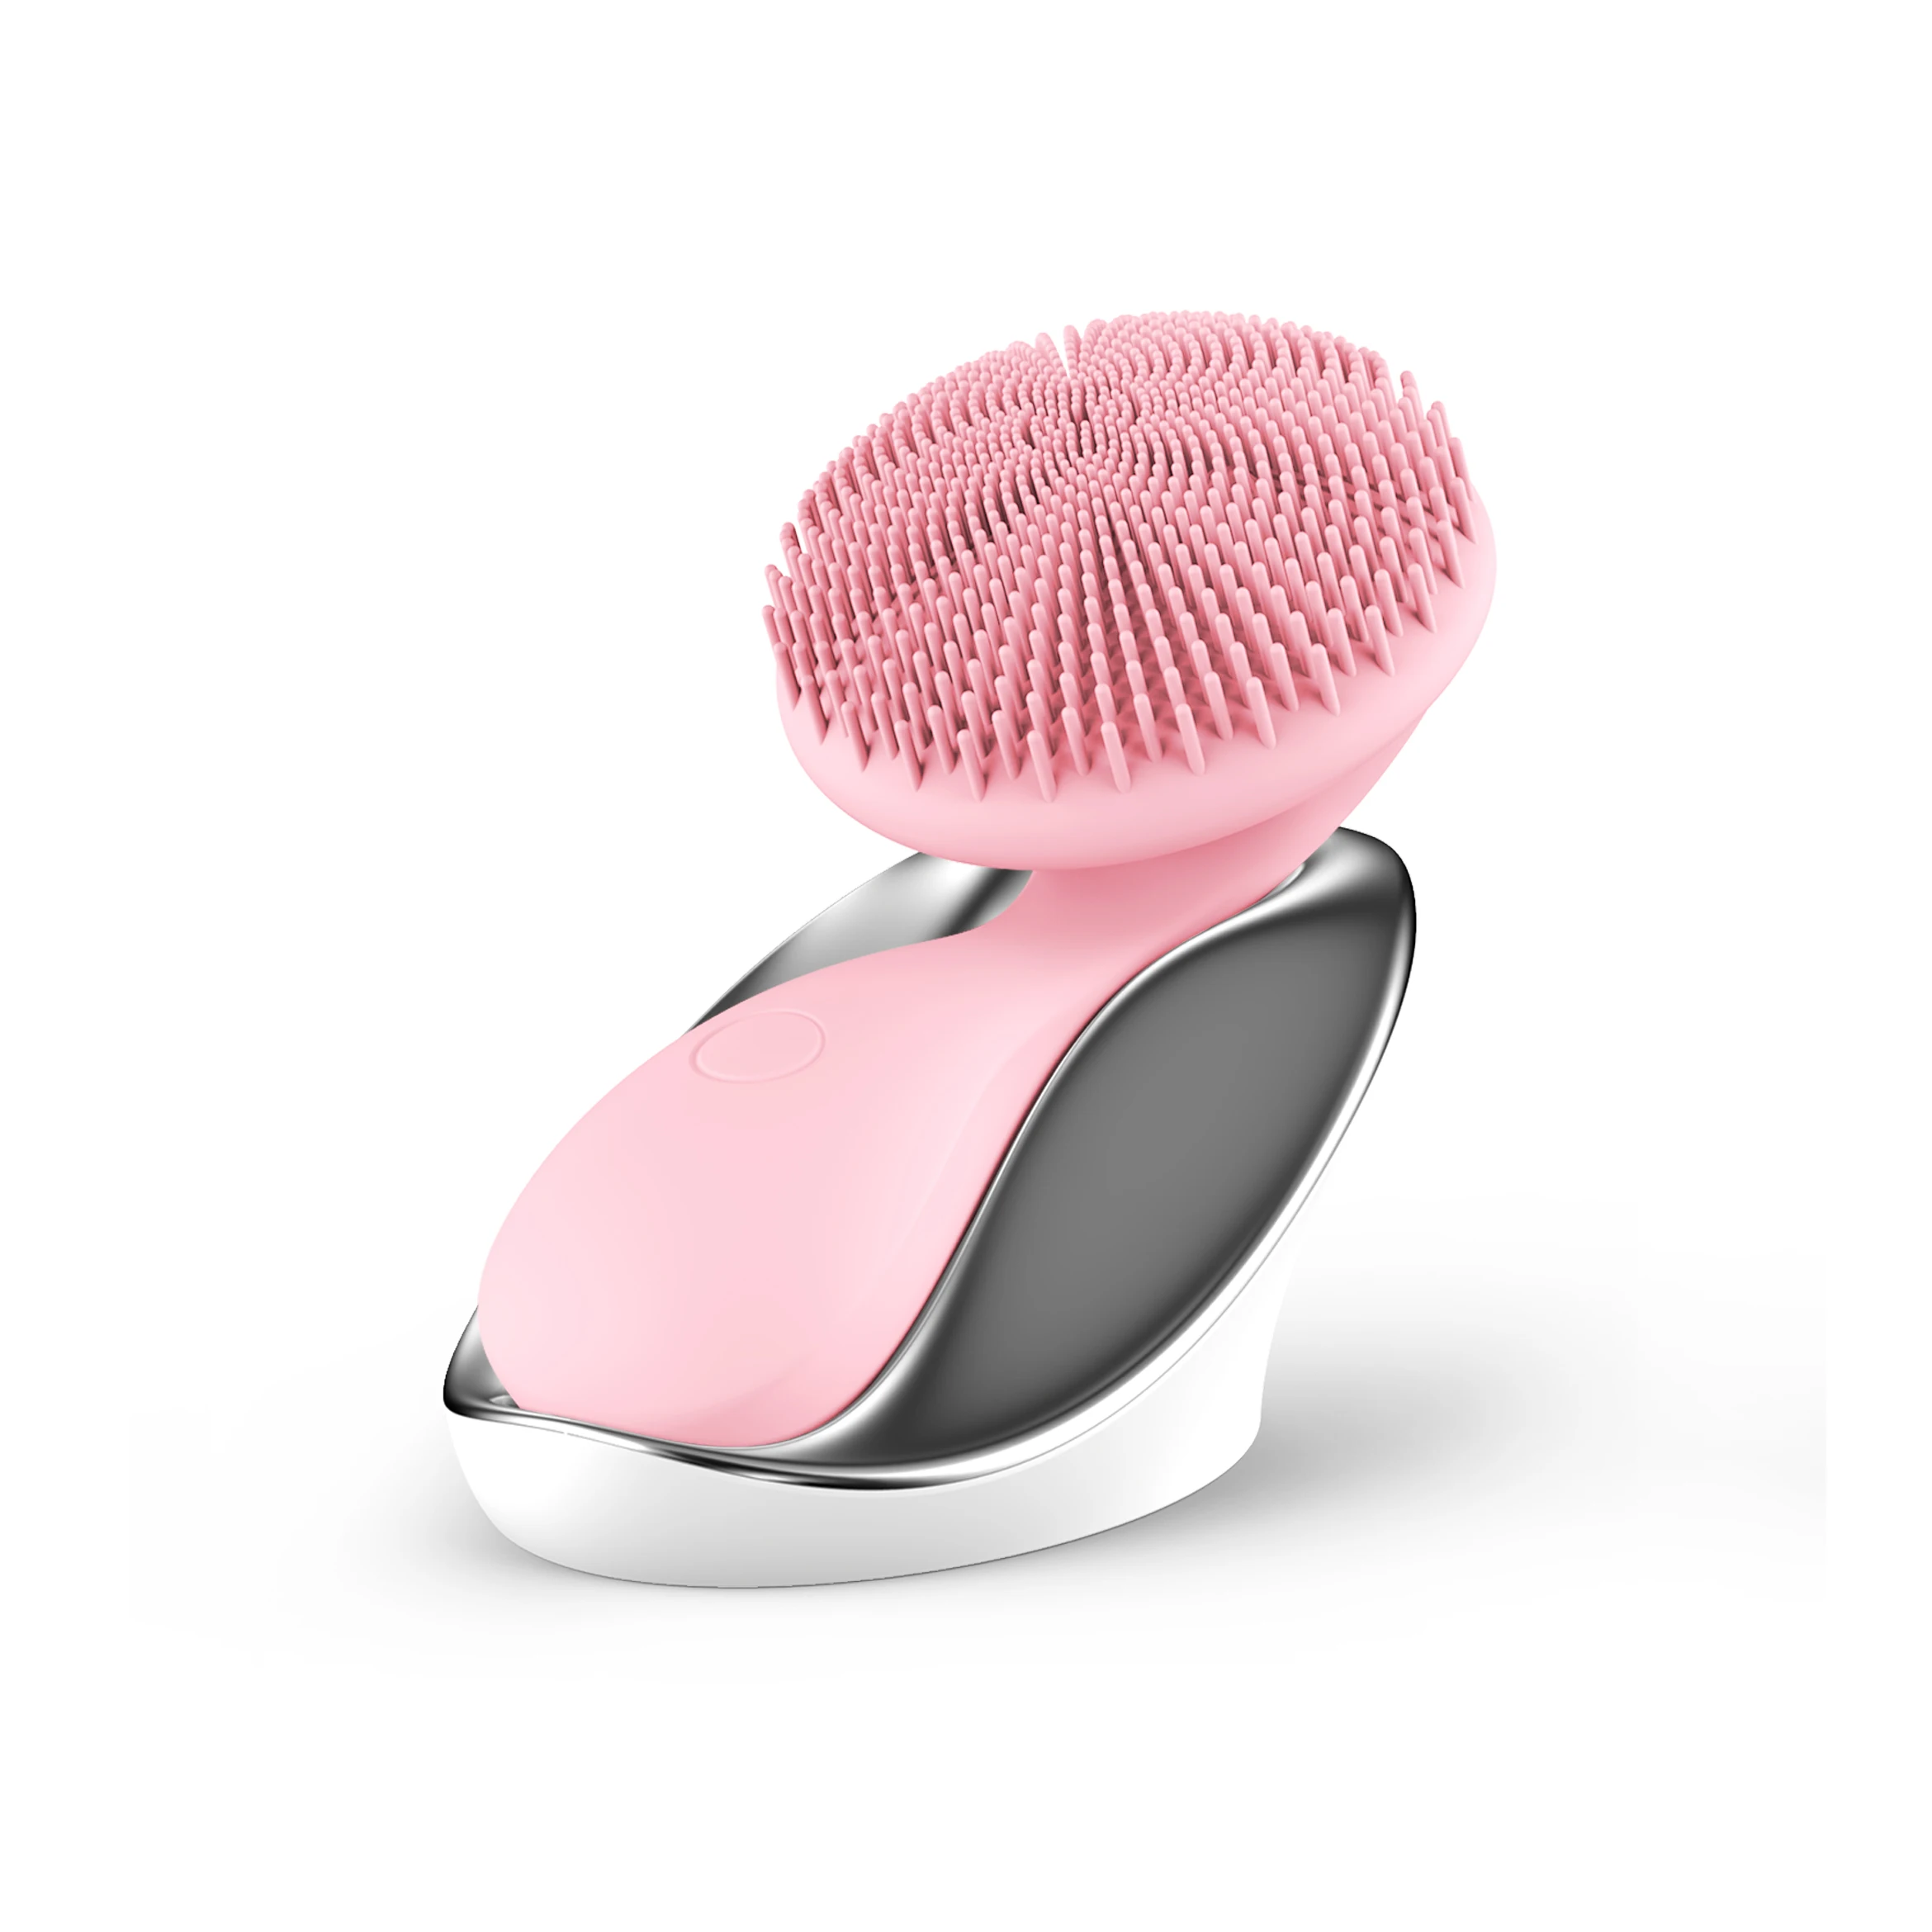 

Iksbeauty Ultrasonic Vibration Face Cleaning Device Sonic Deep Skin Pore Cleansing Massage Silicone Facial Clean Brush, Pink/white/customization